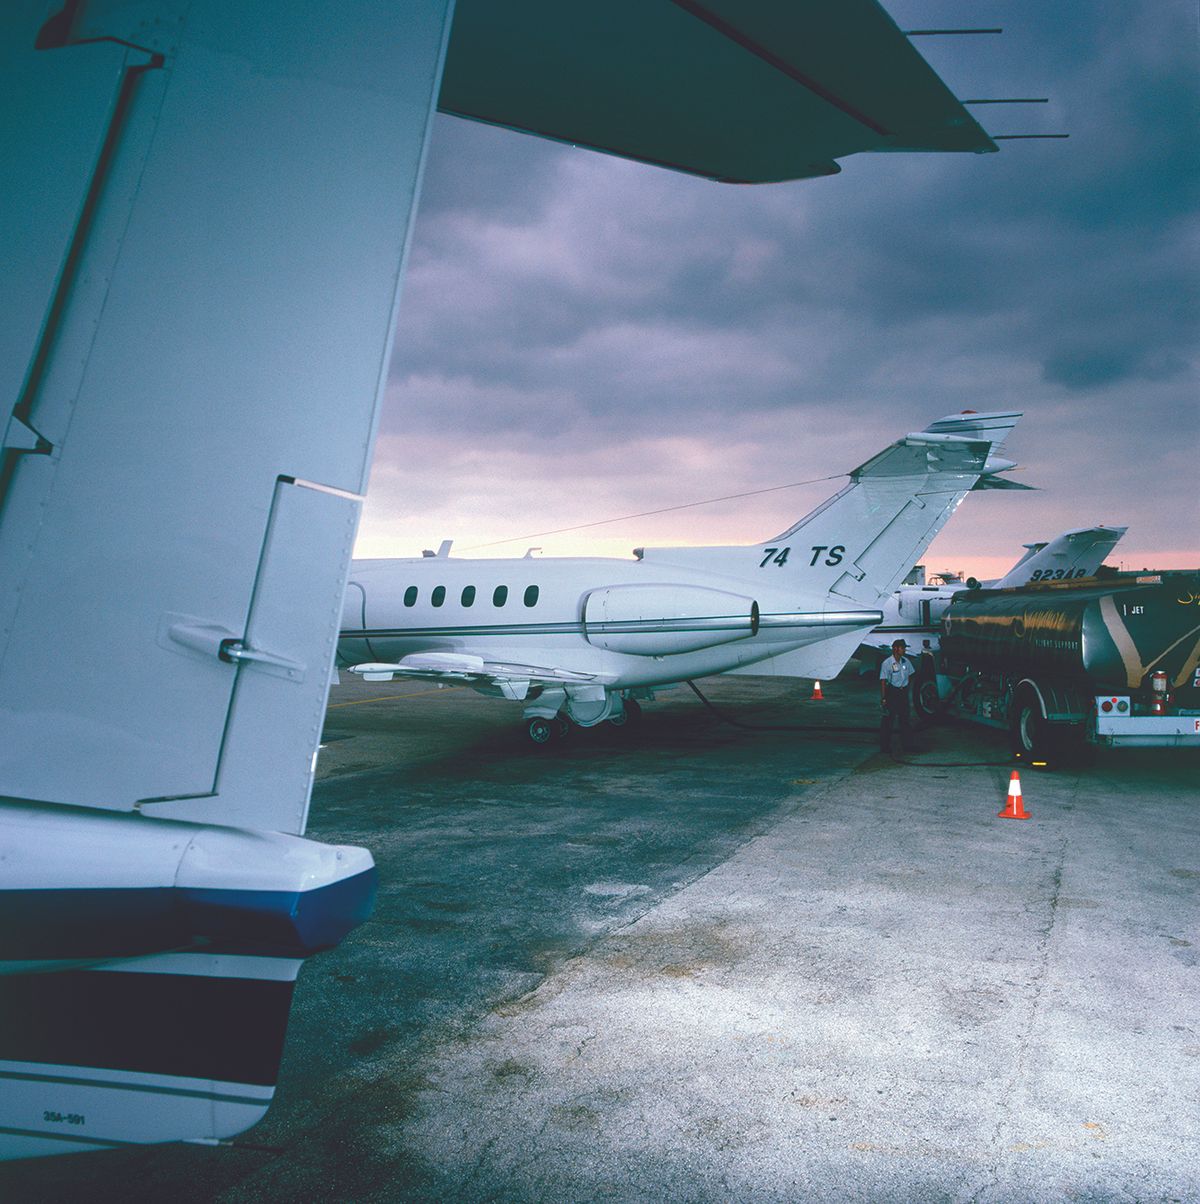 Private jets lined up in Miami. According to New York critic Jerry Saltz, the art world is ‘probably one of the greatest carbon burning industries of its size anywhere on earth’

Photo: Avalon/Construction Photography/Alamy Stock Photo